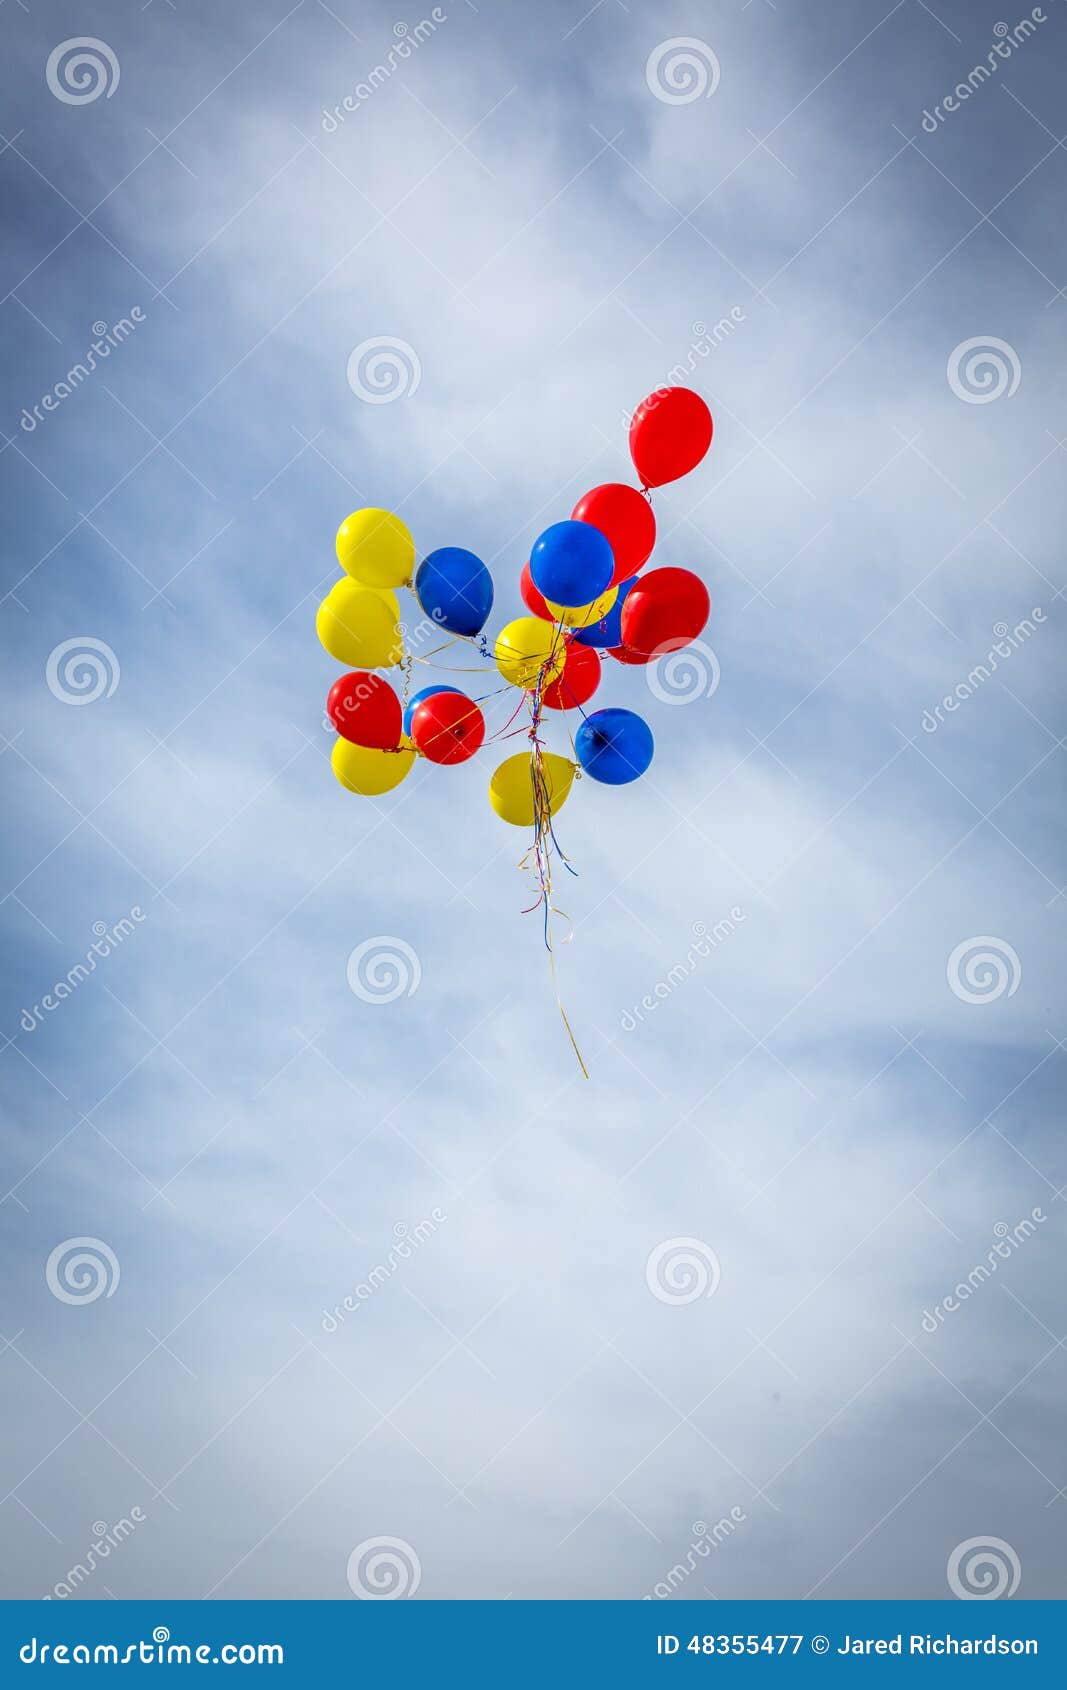 grouping of balloons floating away